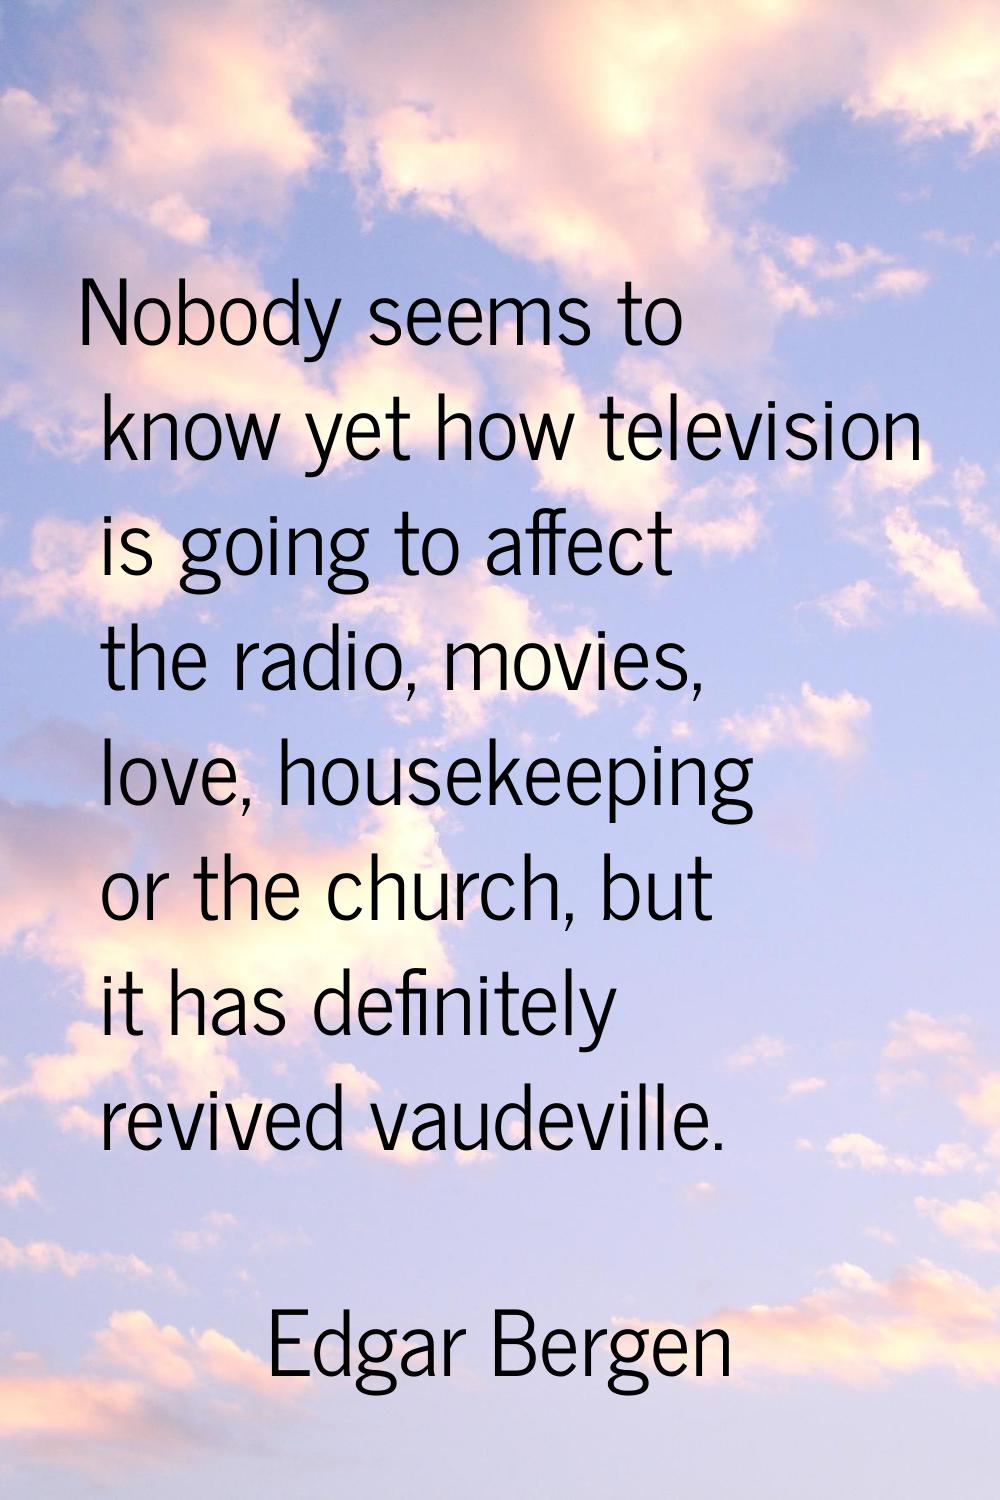 Nobody seems to know yet how television is going to affect the radio, movies, love, housekeeping or